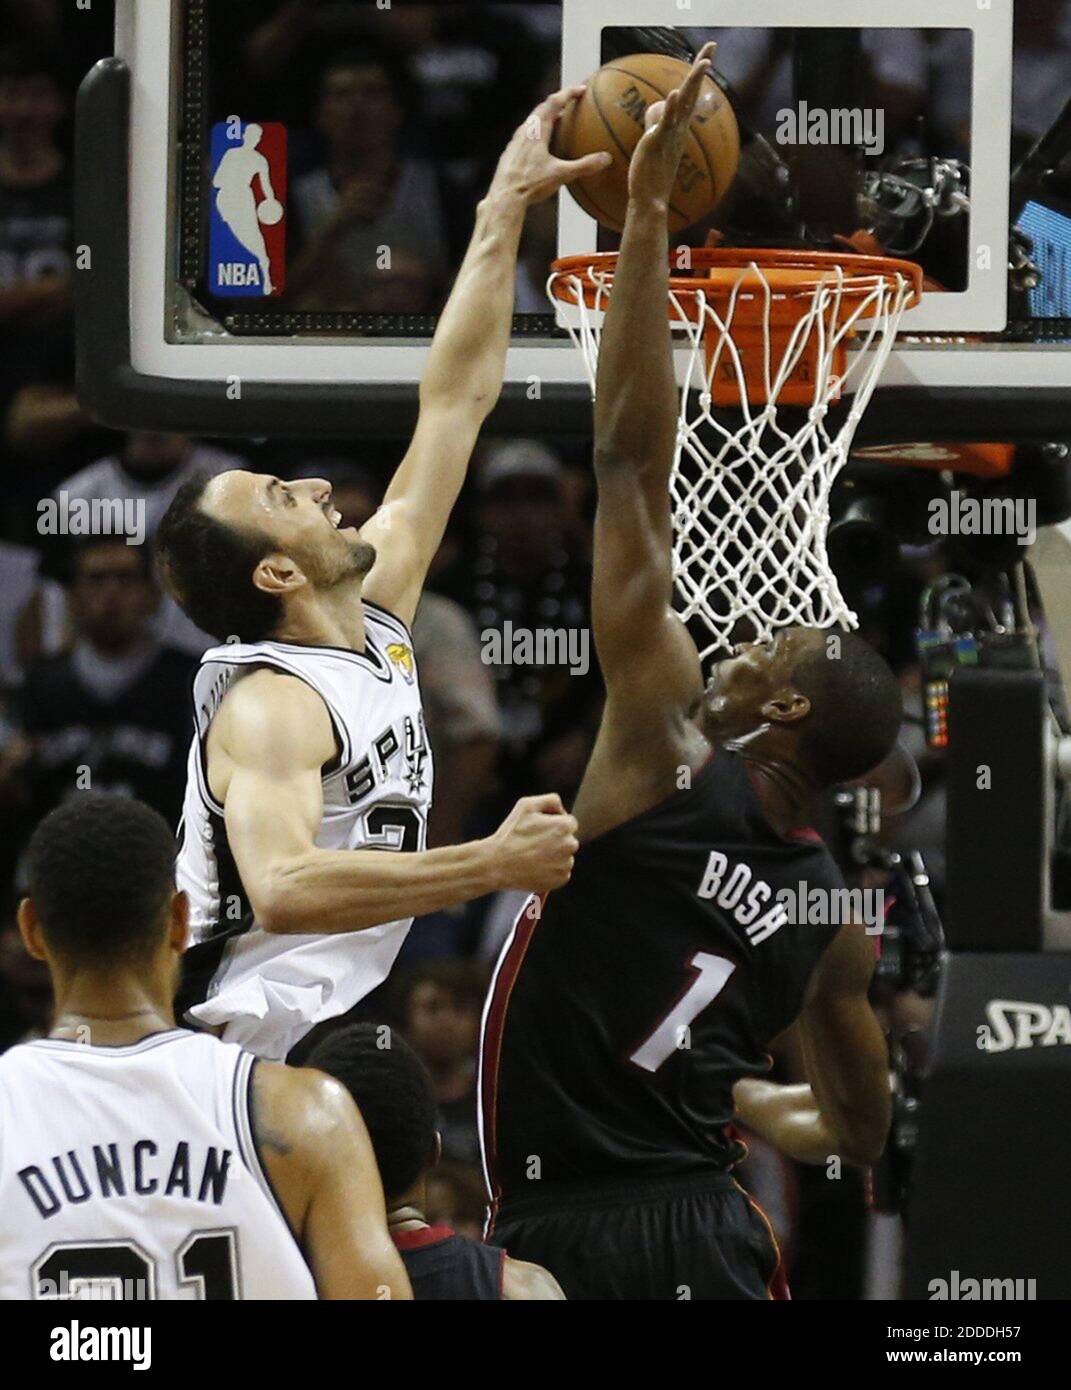 NO FILM, NO VIDEO, NO TV, NO DOCUMENTARY - Miami Heat's Chris Bosh fails to stop San Antonio Spurs' Manu Ginobili as he scores in the second quarter in Game 5 of the NBA Finals at the AT&T Center in San Antonio, TX, USA, on Sunday, June 15, 2014. Photo by Charles Trainor Jr./Miami Herald/MCT/ABACAPRESS.COM Stock Photo